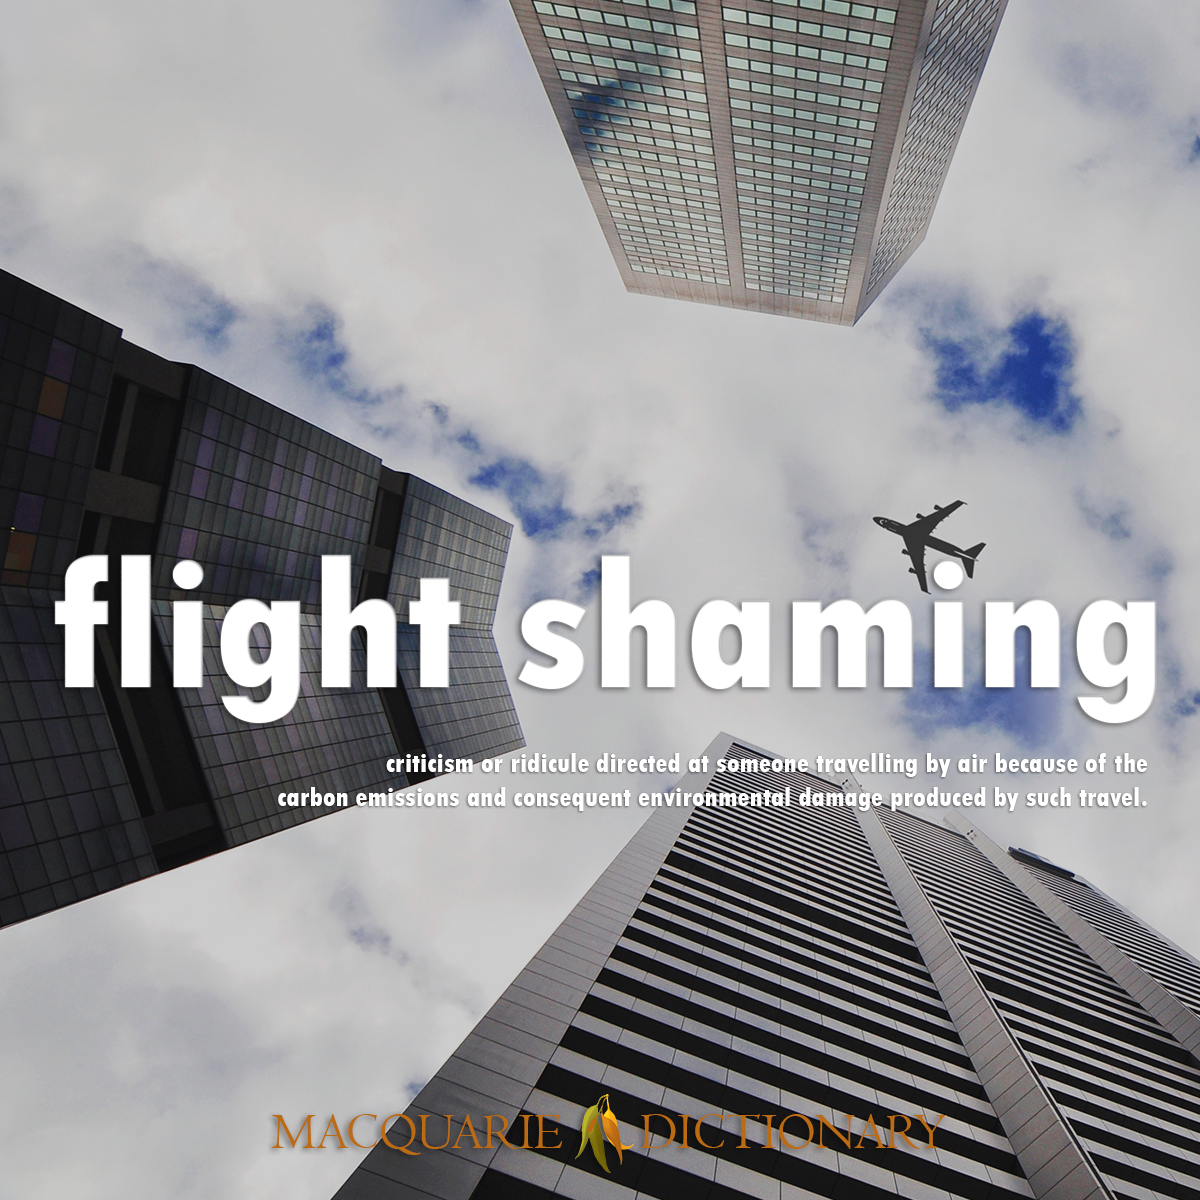 Image of Macquarie Dictionary Word of the Year flight shaming criticism or ridicule directed at someone travelling by air because of the carbon emissions and consequent environmental damage produced by such travel.